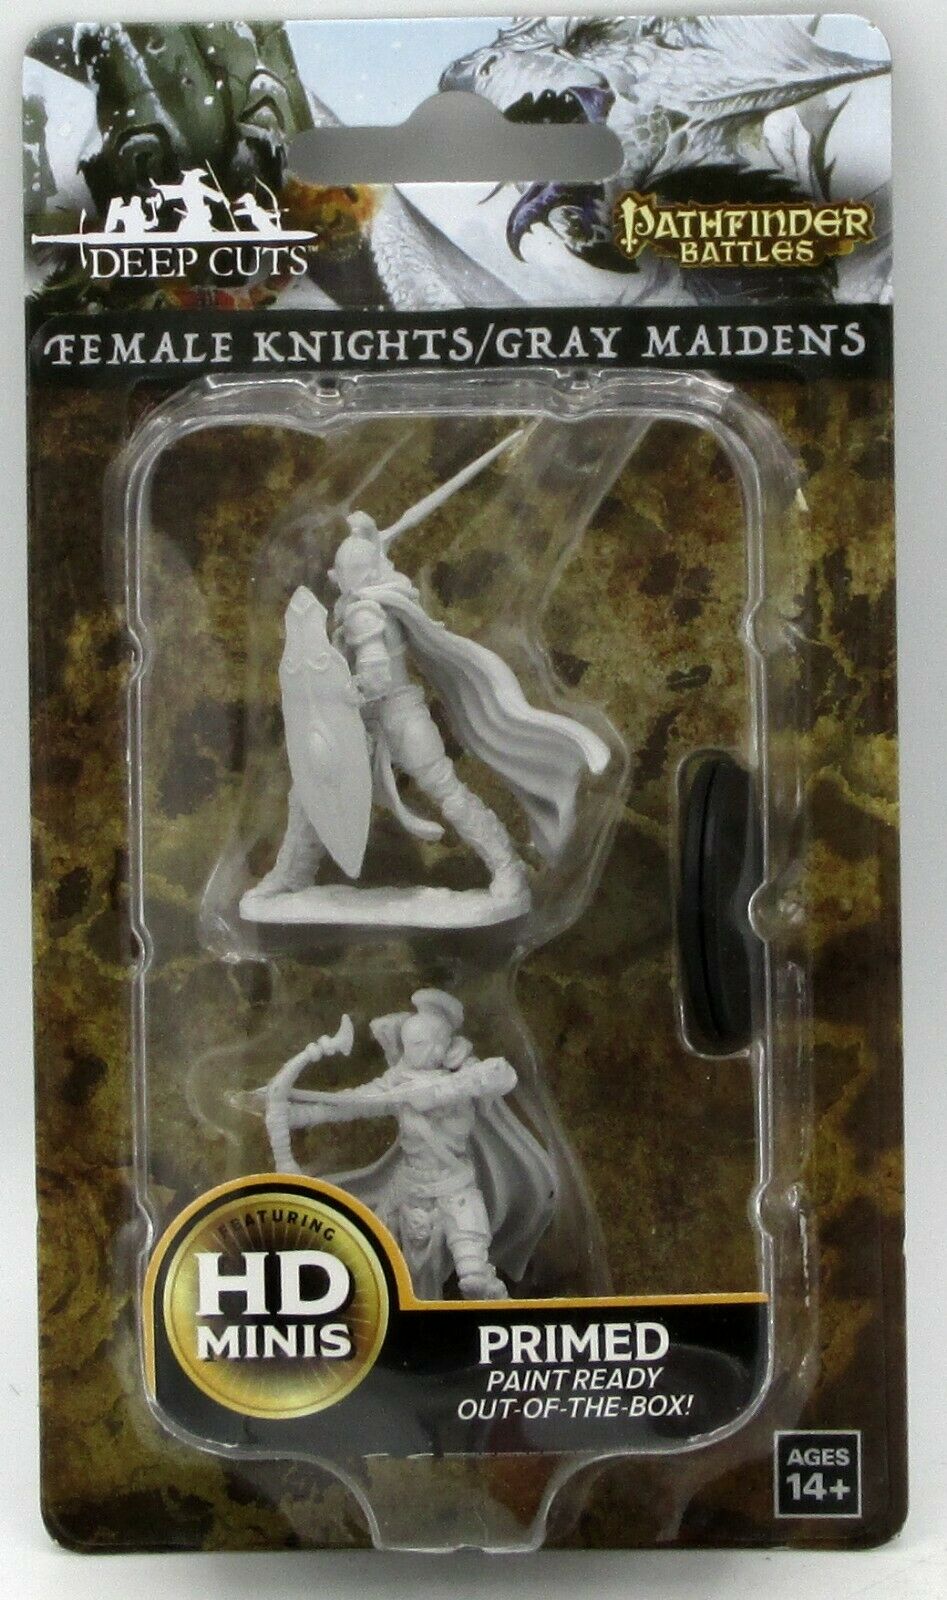 Pathfinder Battles Female Knights/Gray Maidens | Arkham Games and Comics